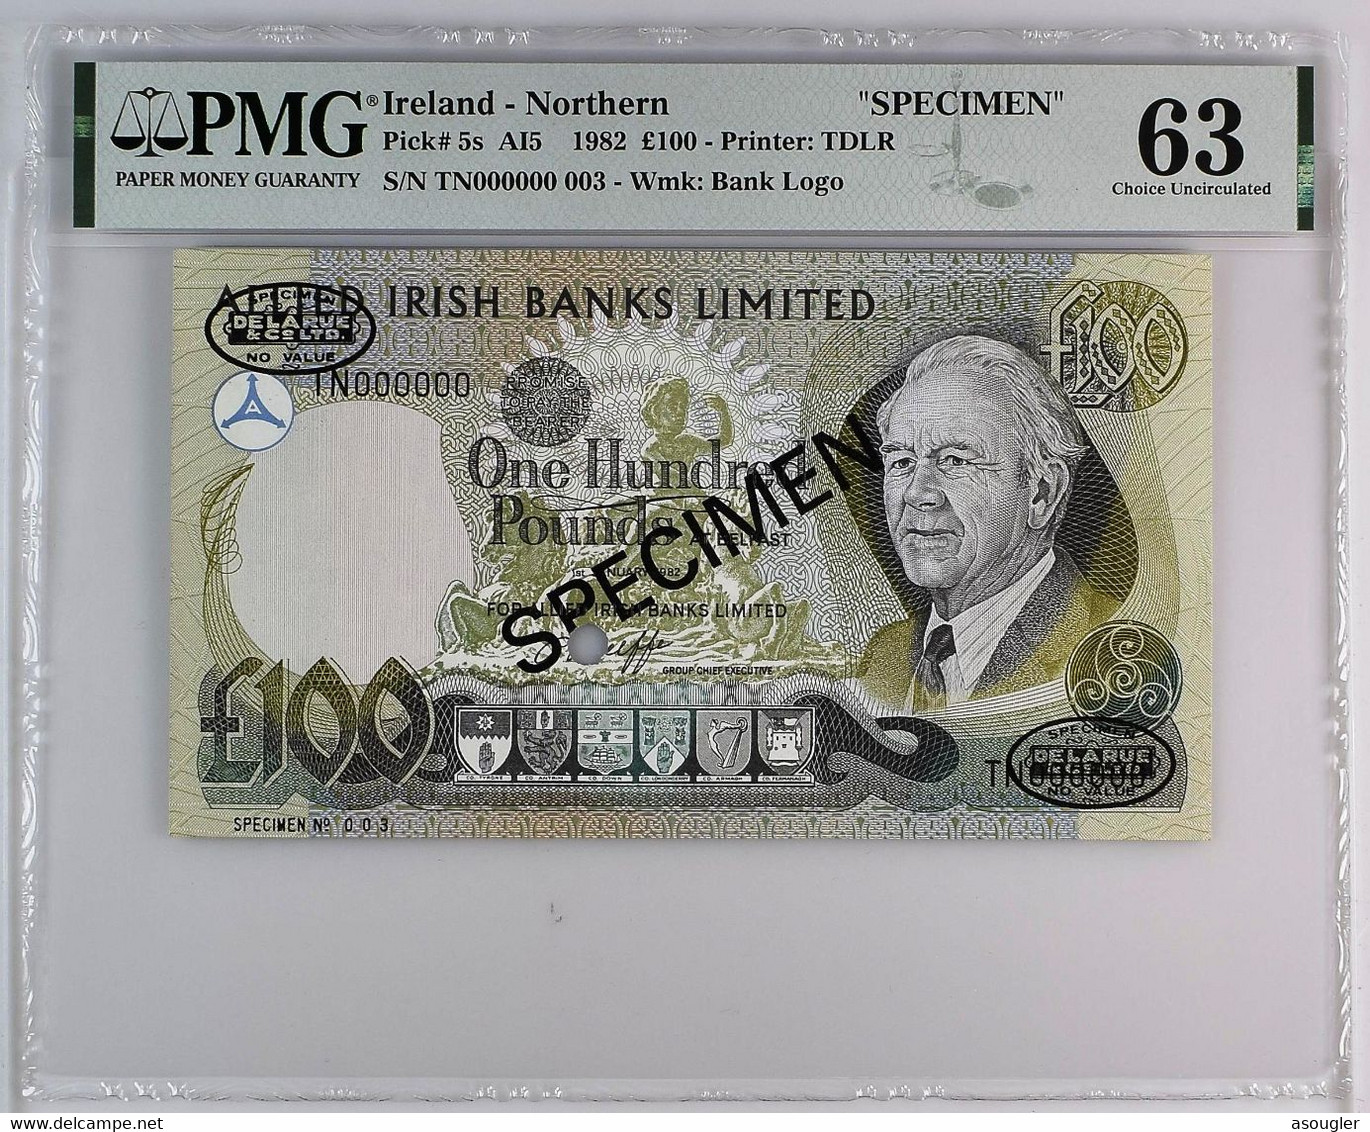 Ireland Northern 100 Pounds 1982 SPECIMEN PMG 63 UNC P-5s "free Shipping Via Registered Air Mail" - 100 Pond